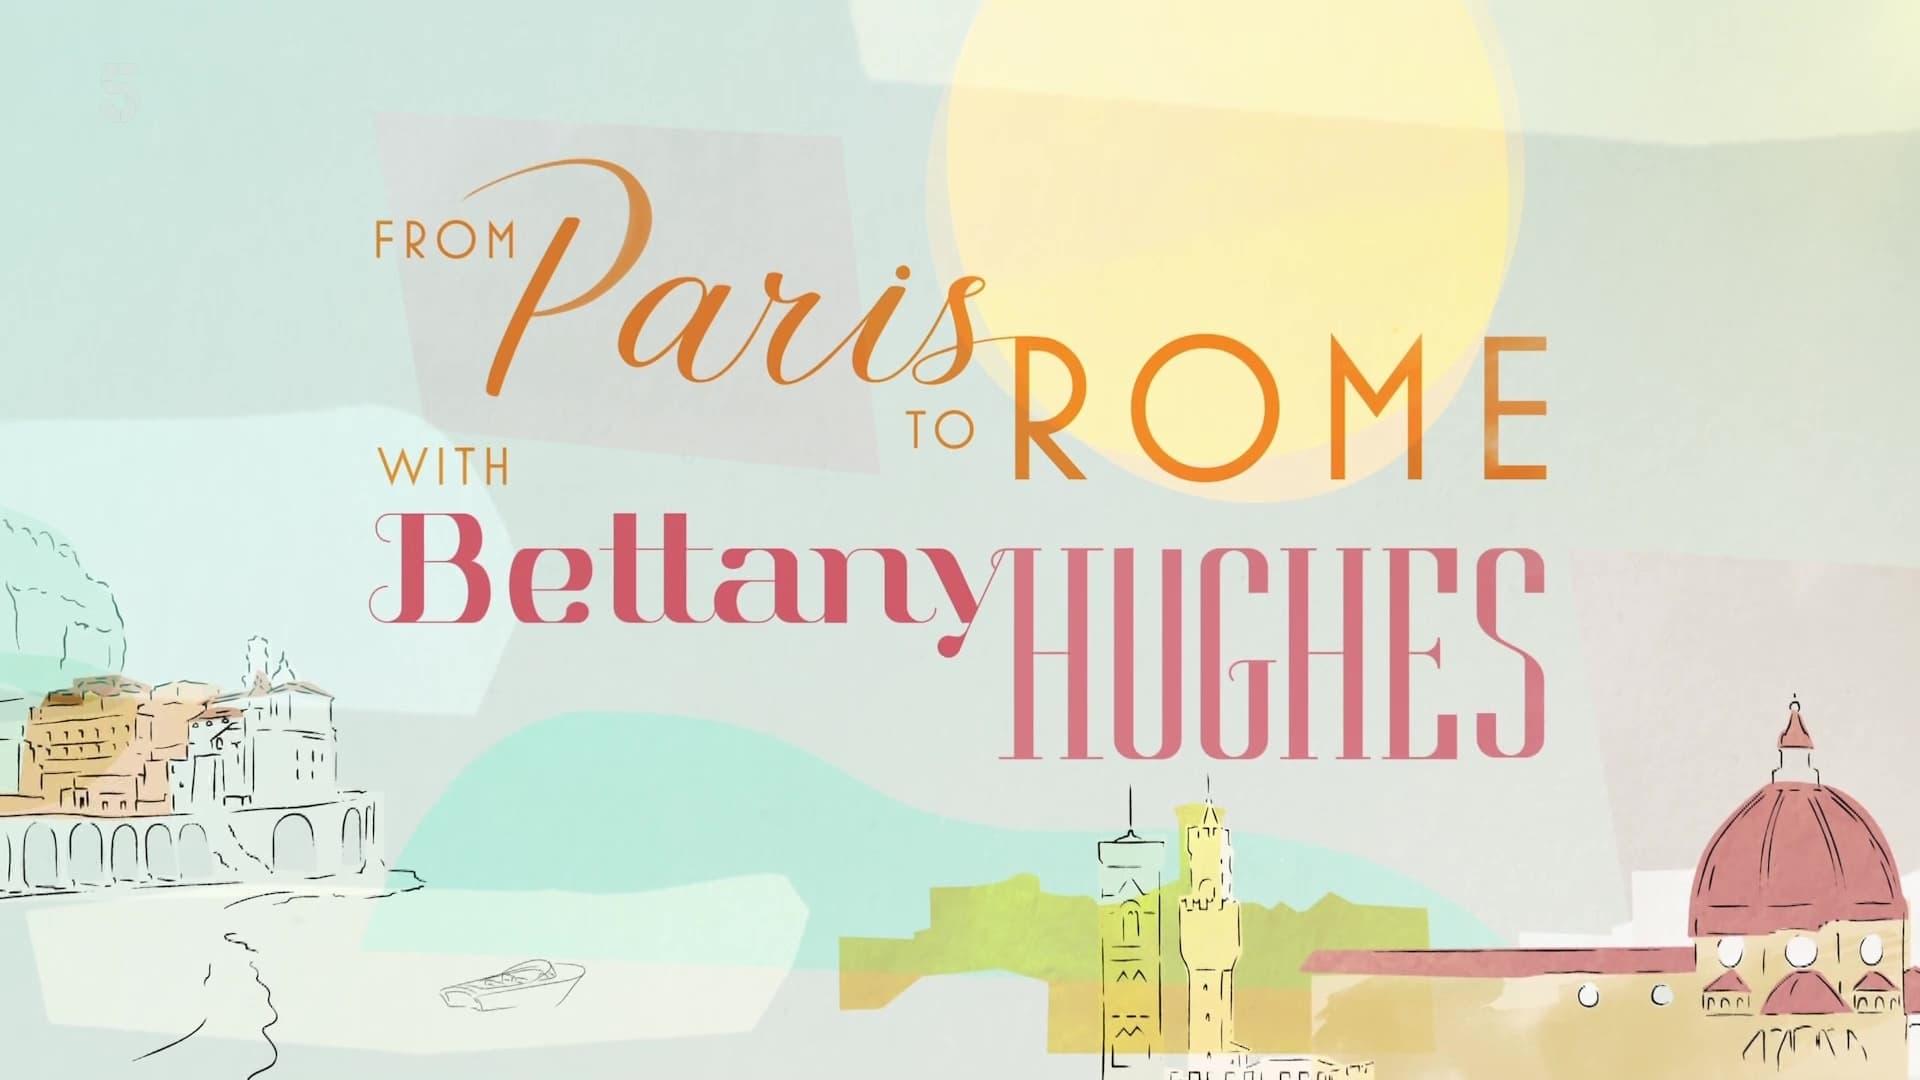 From Paris to Rome with Bettany Hughes backdrop